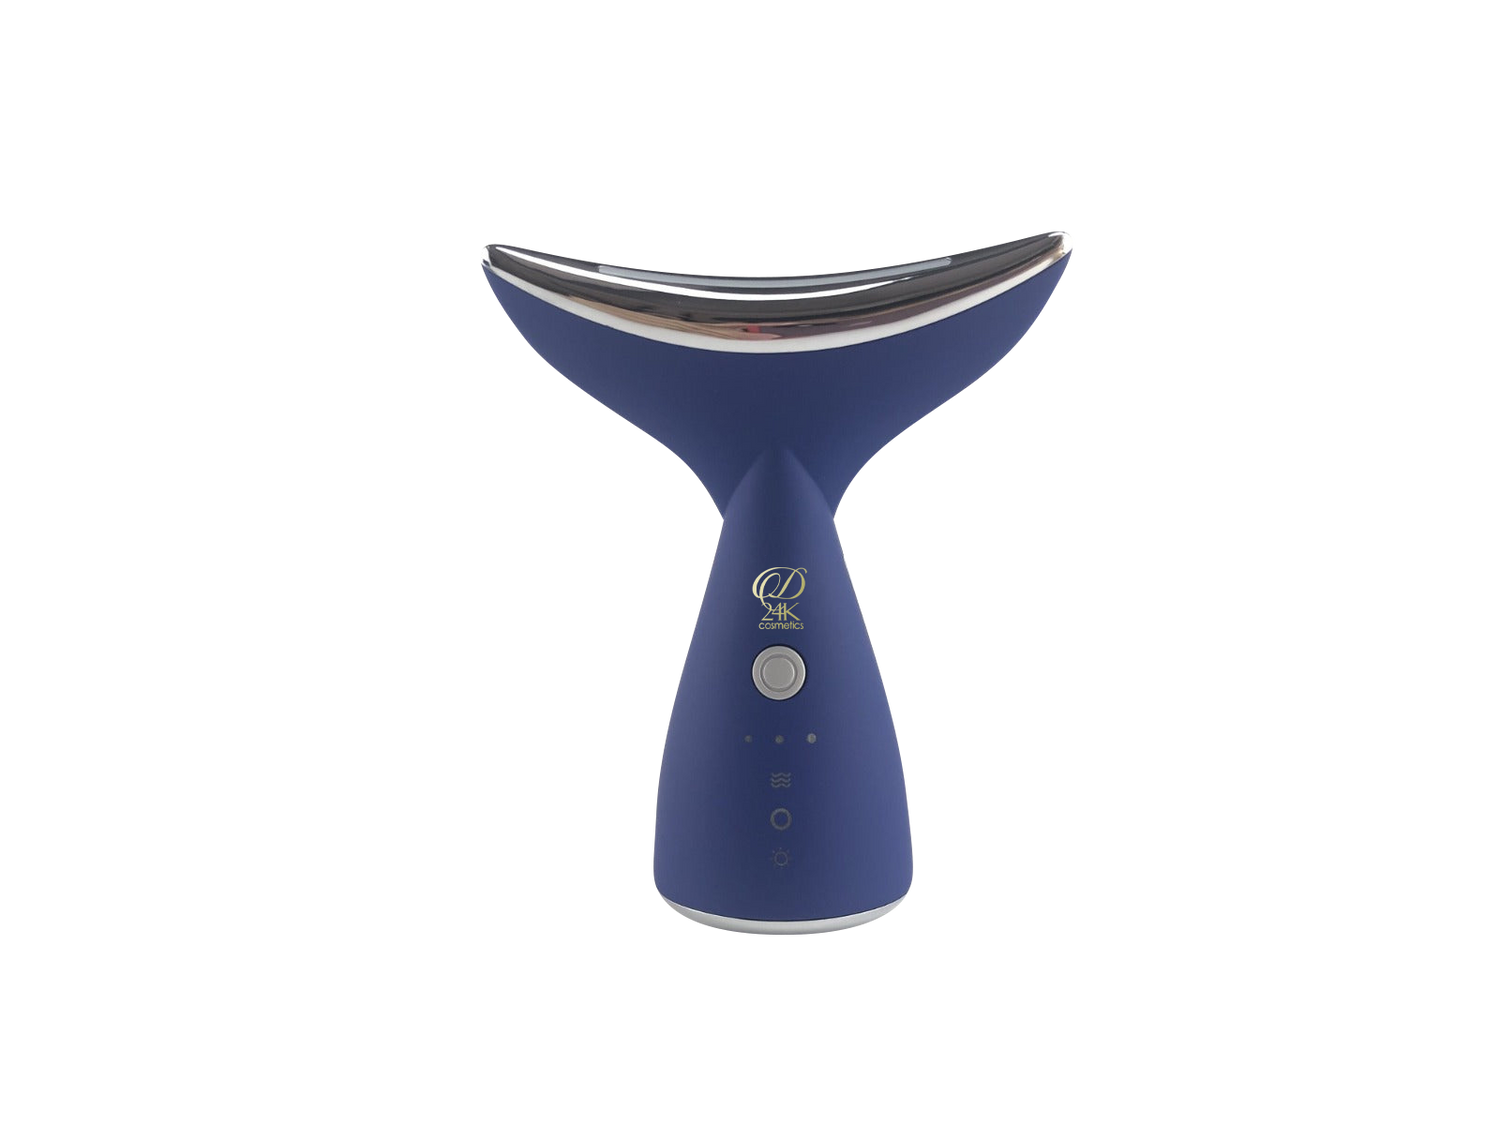 Non-Surgical Neck Lift Device with Light Therapy